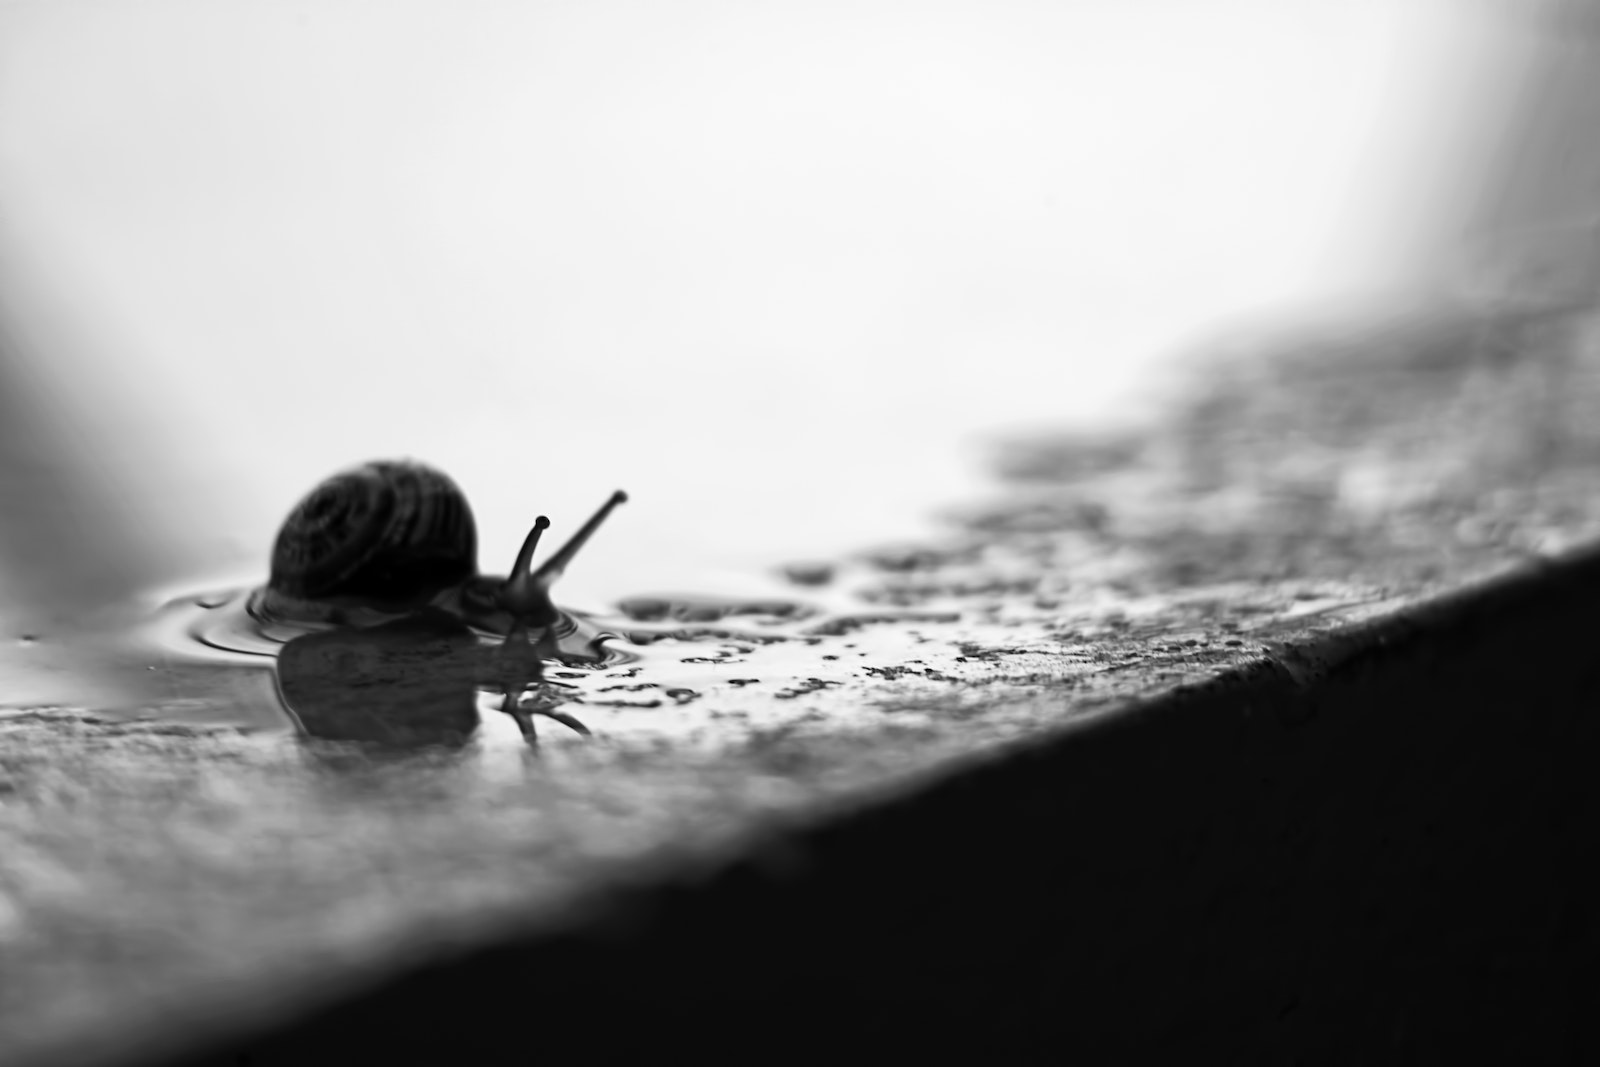 Grayscale Photography Of Snail